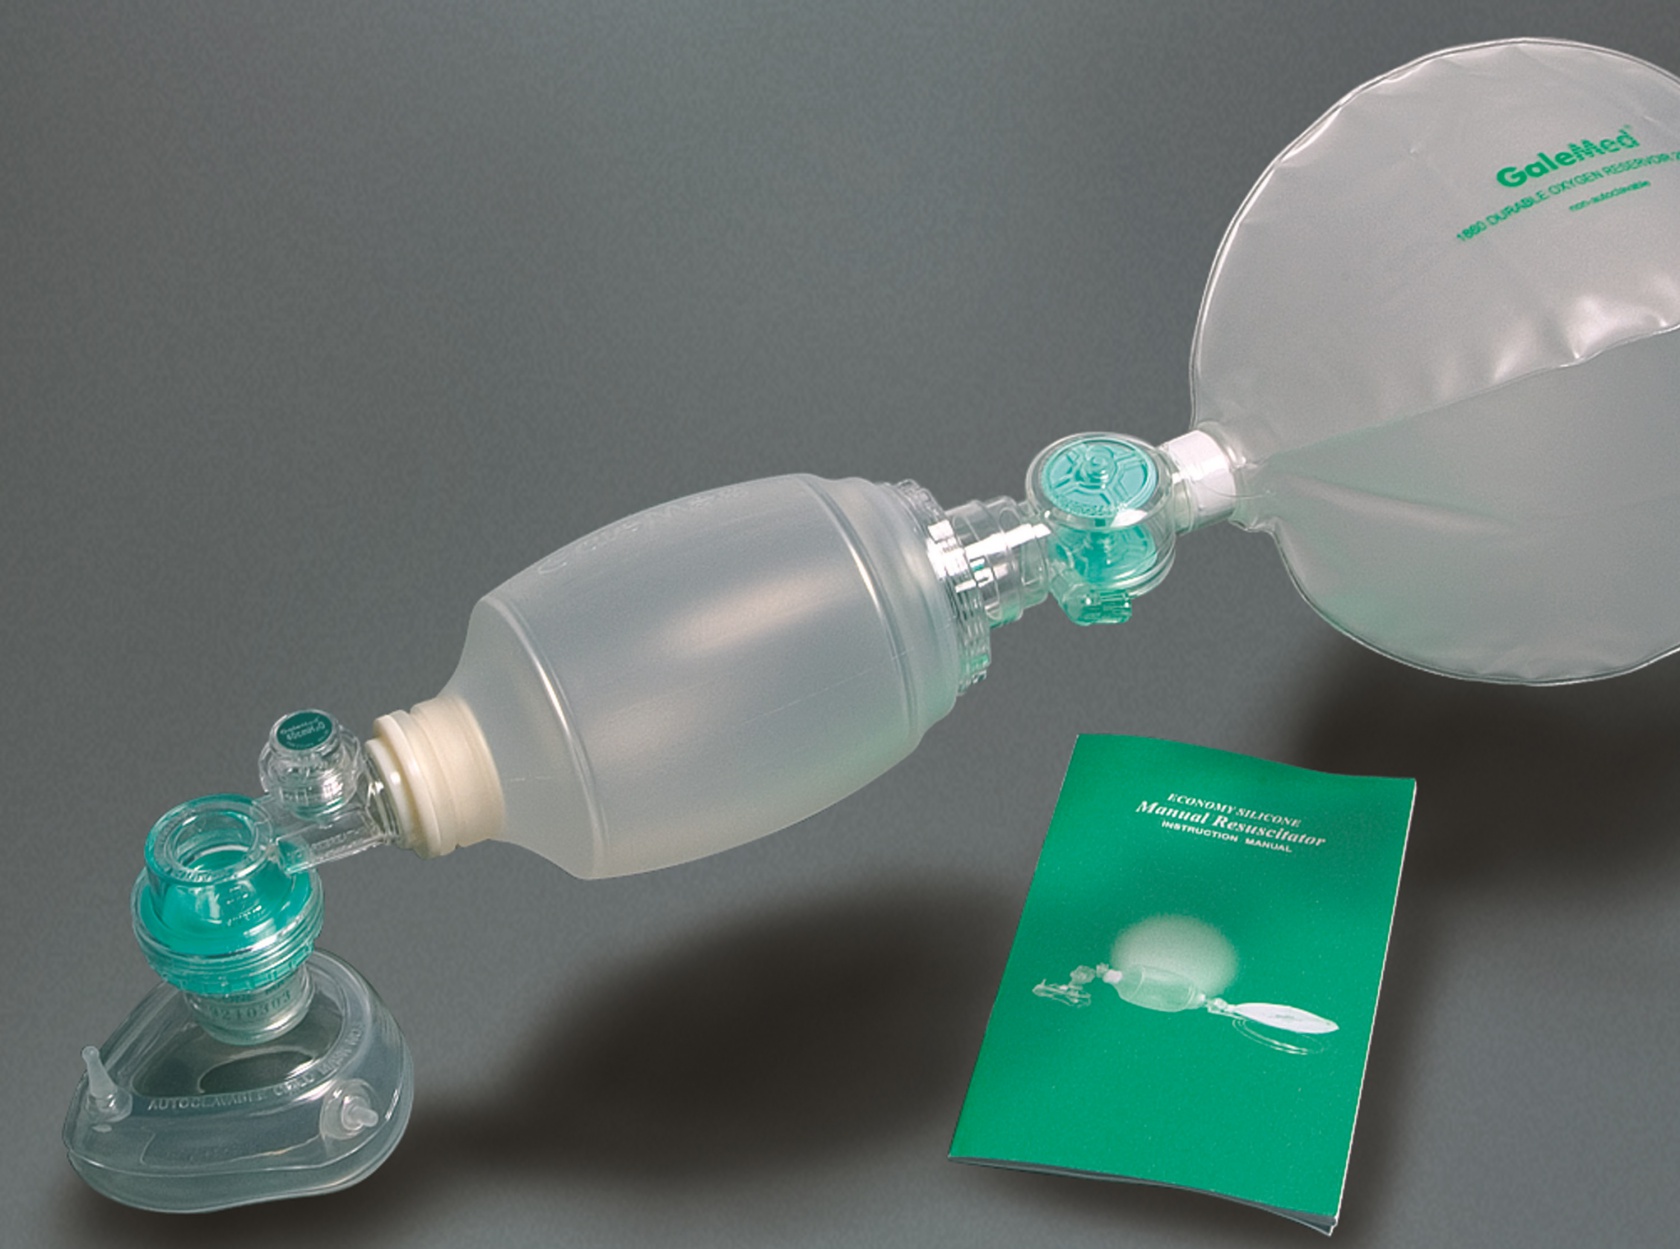 Galemed Adult Silicone Resuscitator Child wiith 5122 Mask